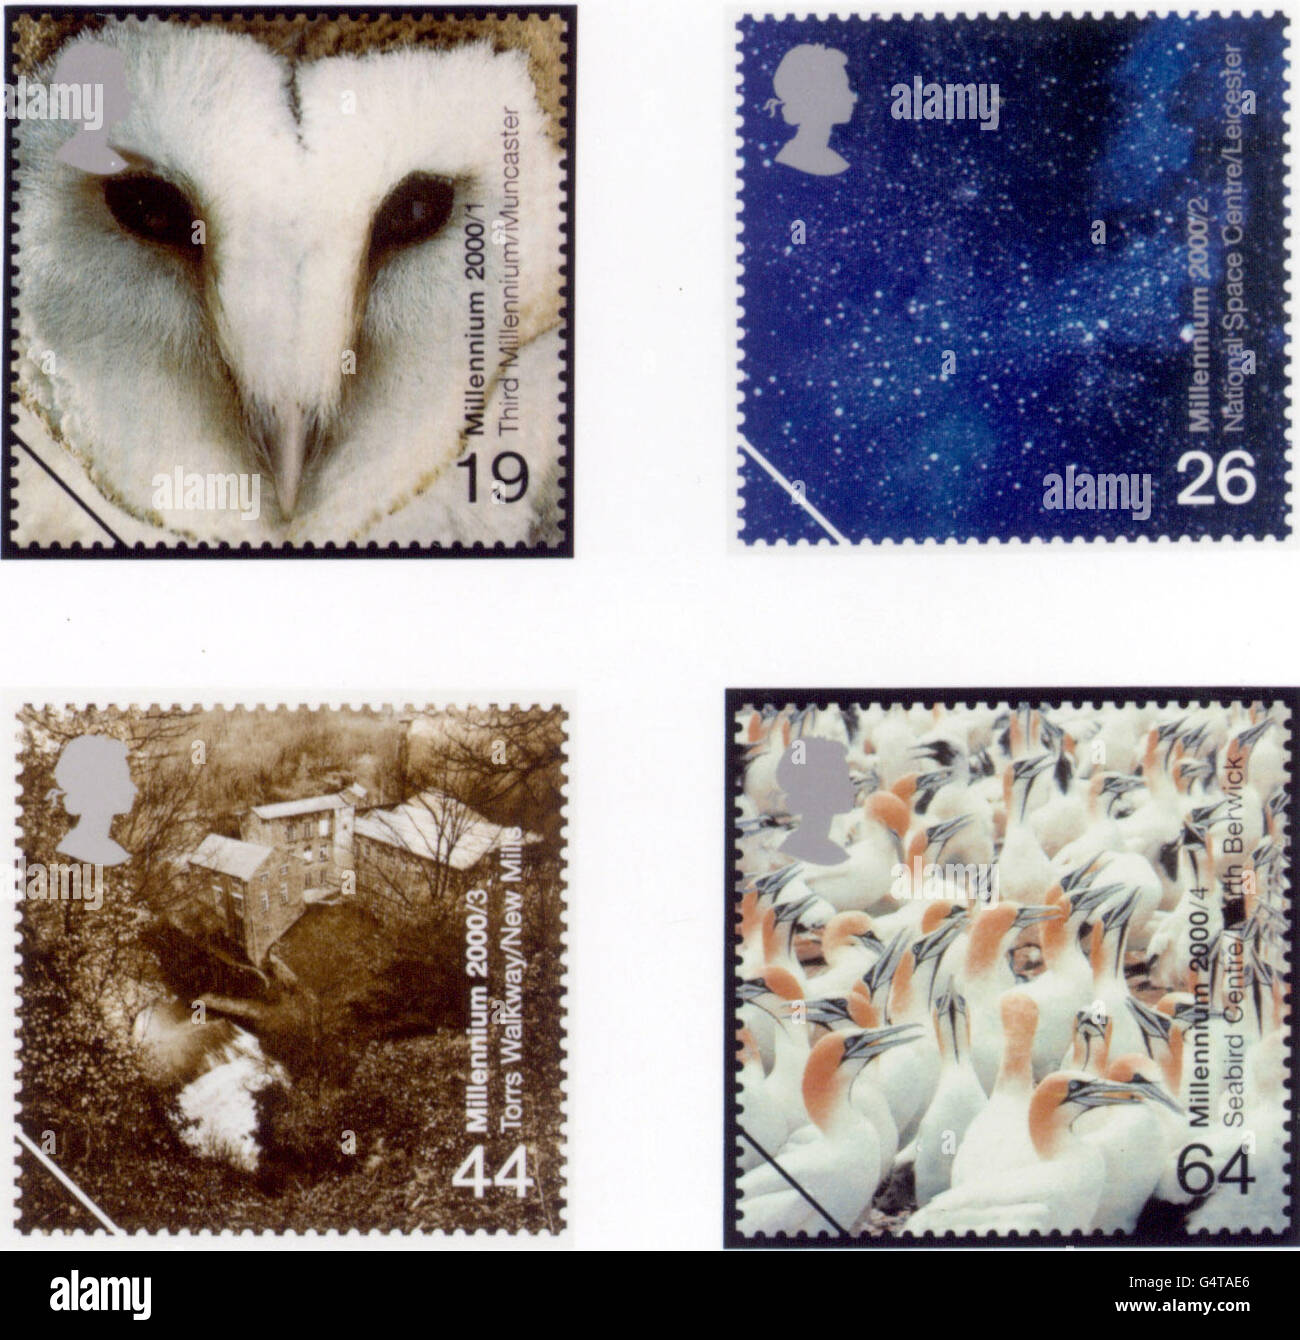 The first four stamps unveiled 25/11/1999 of the second phase of Royal Mail's Millennium Collection. Forty-eight stamps capturing the face of Britain through the eyes of a lens have been chosen by Royal Mail to celebrate the Year 2000. * The first set of stamps of the new Millenniumium is 'Above and Beyond''. The collection begins in dramatic style with the face of a barn owl staring out from the 19p Second Class stamp. A galaxy of stars in a brilliant night sky appears on the 26p First Class Stamp. Torrs Walkway/New Mills is the subject of the 44p stamp. A colourful flock of gannets is on Stock Photo